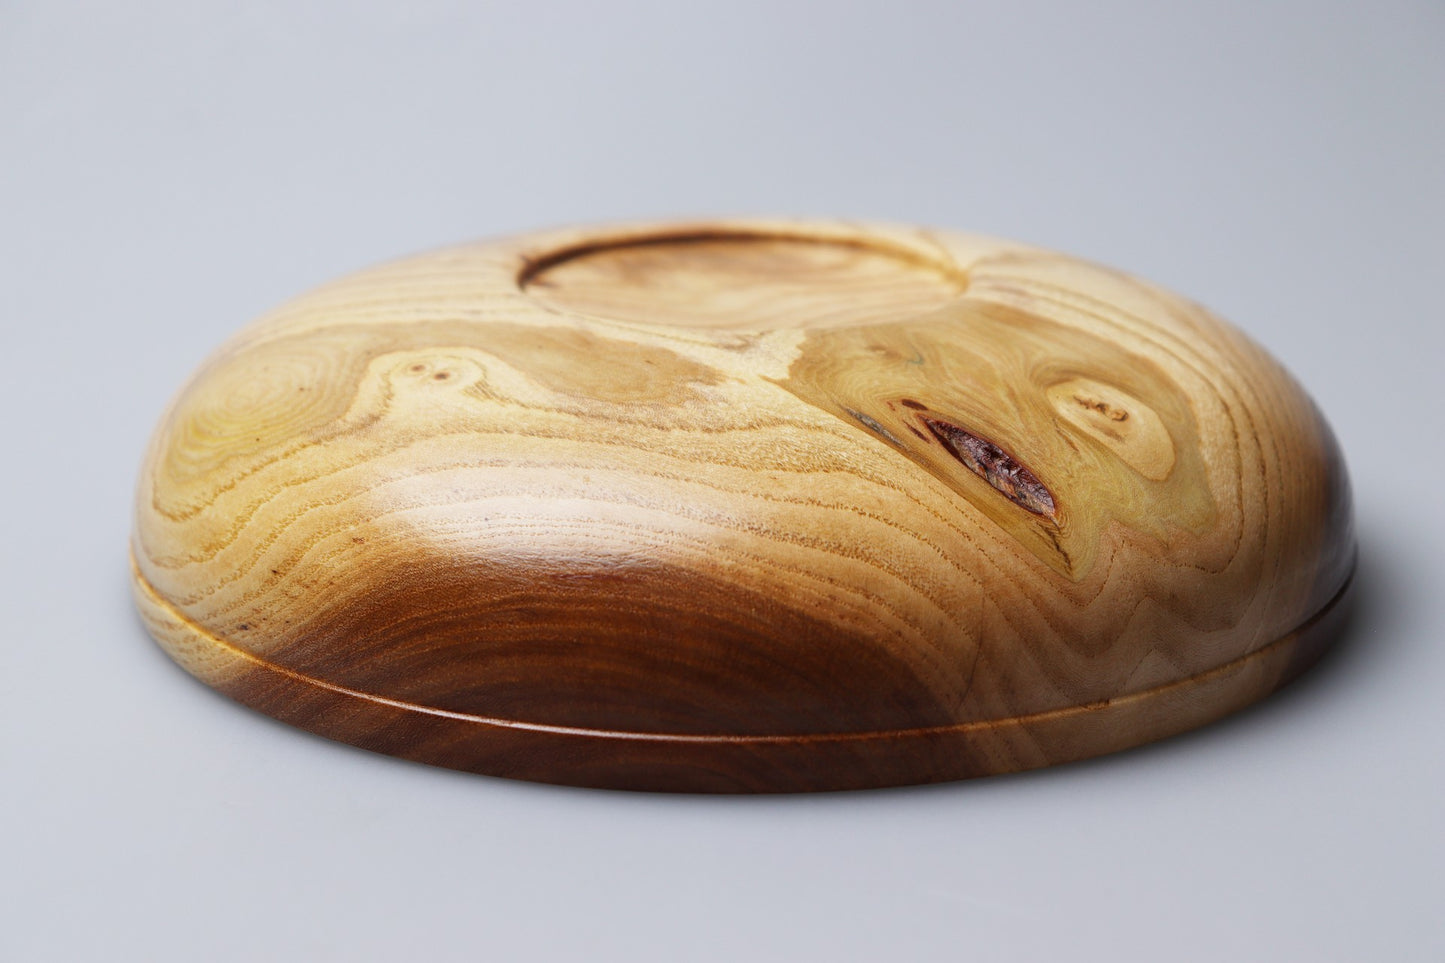 7.5 x 2" Mulberry Wood Bowl